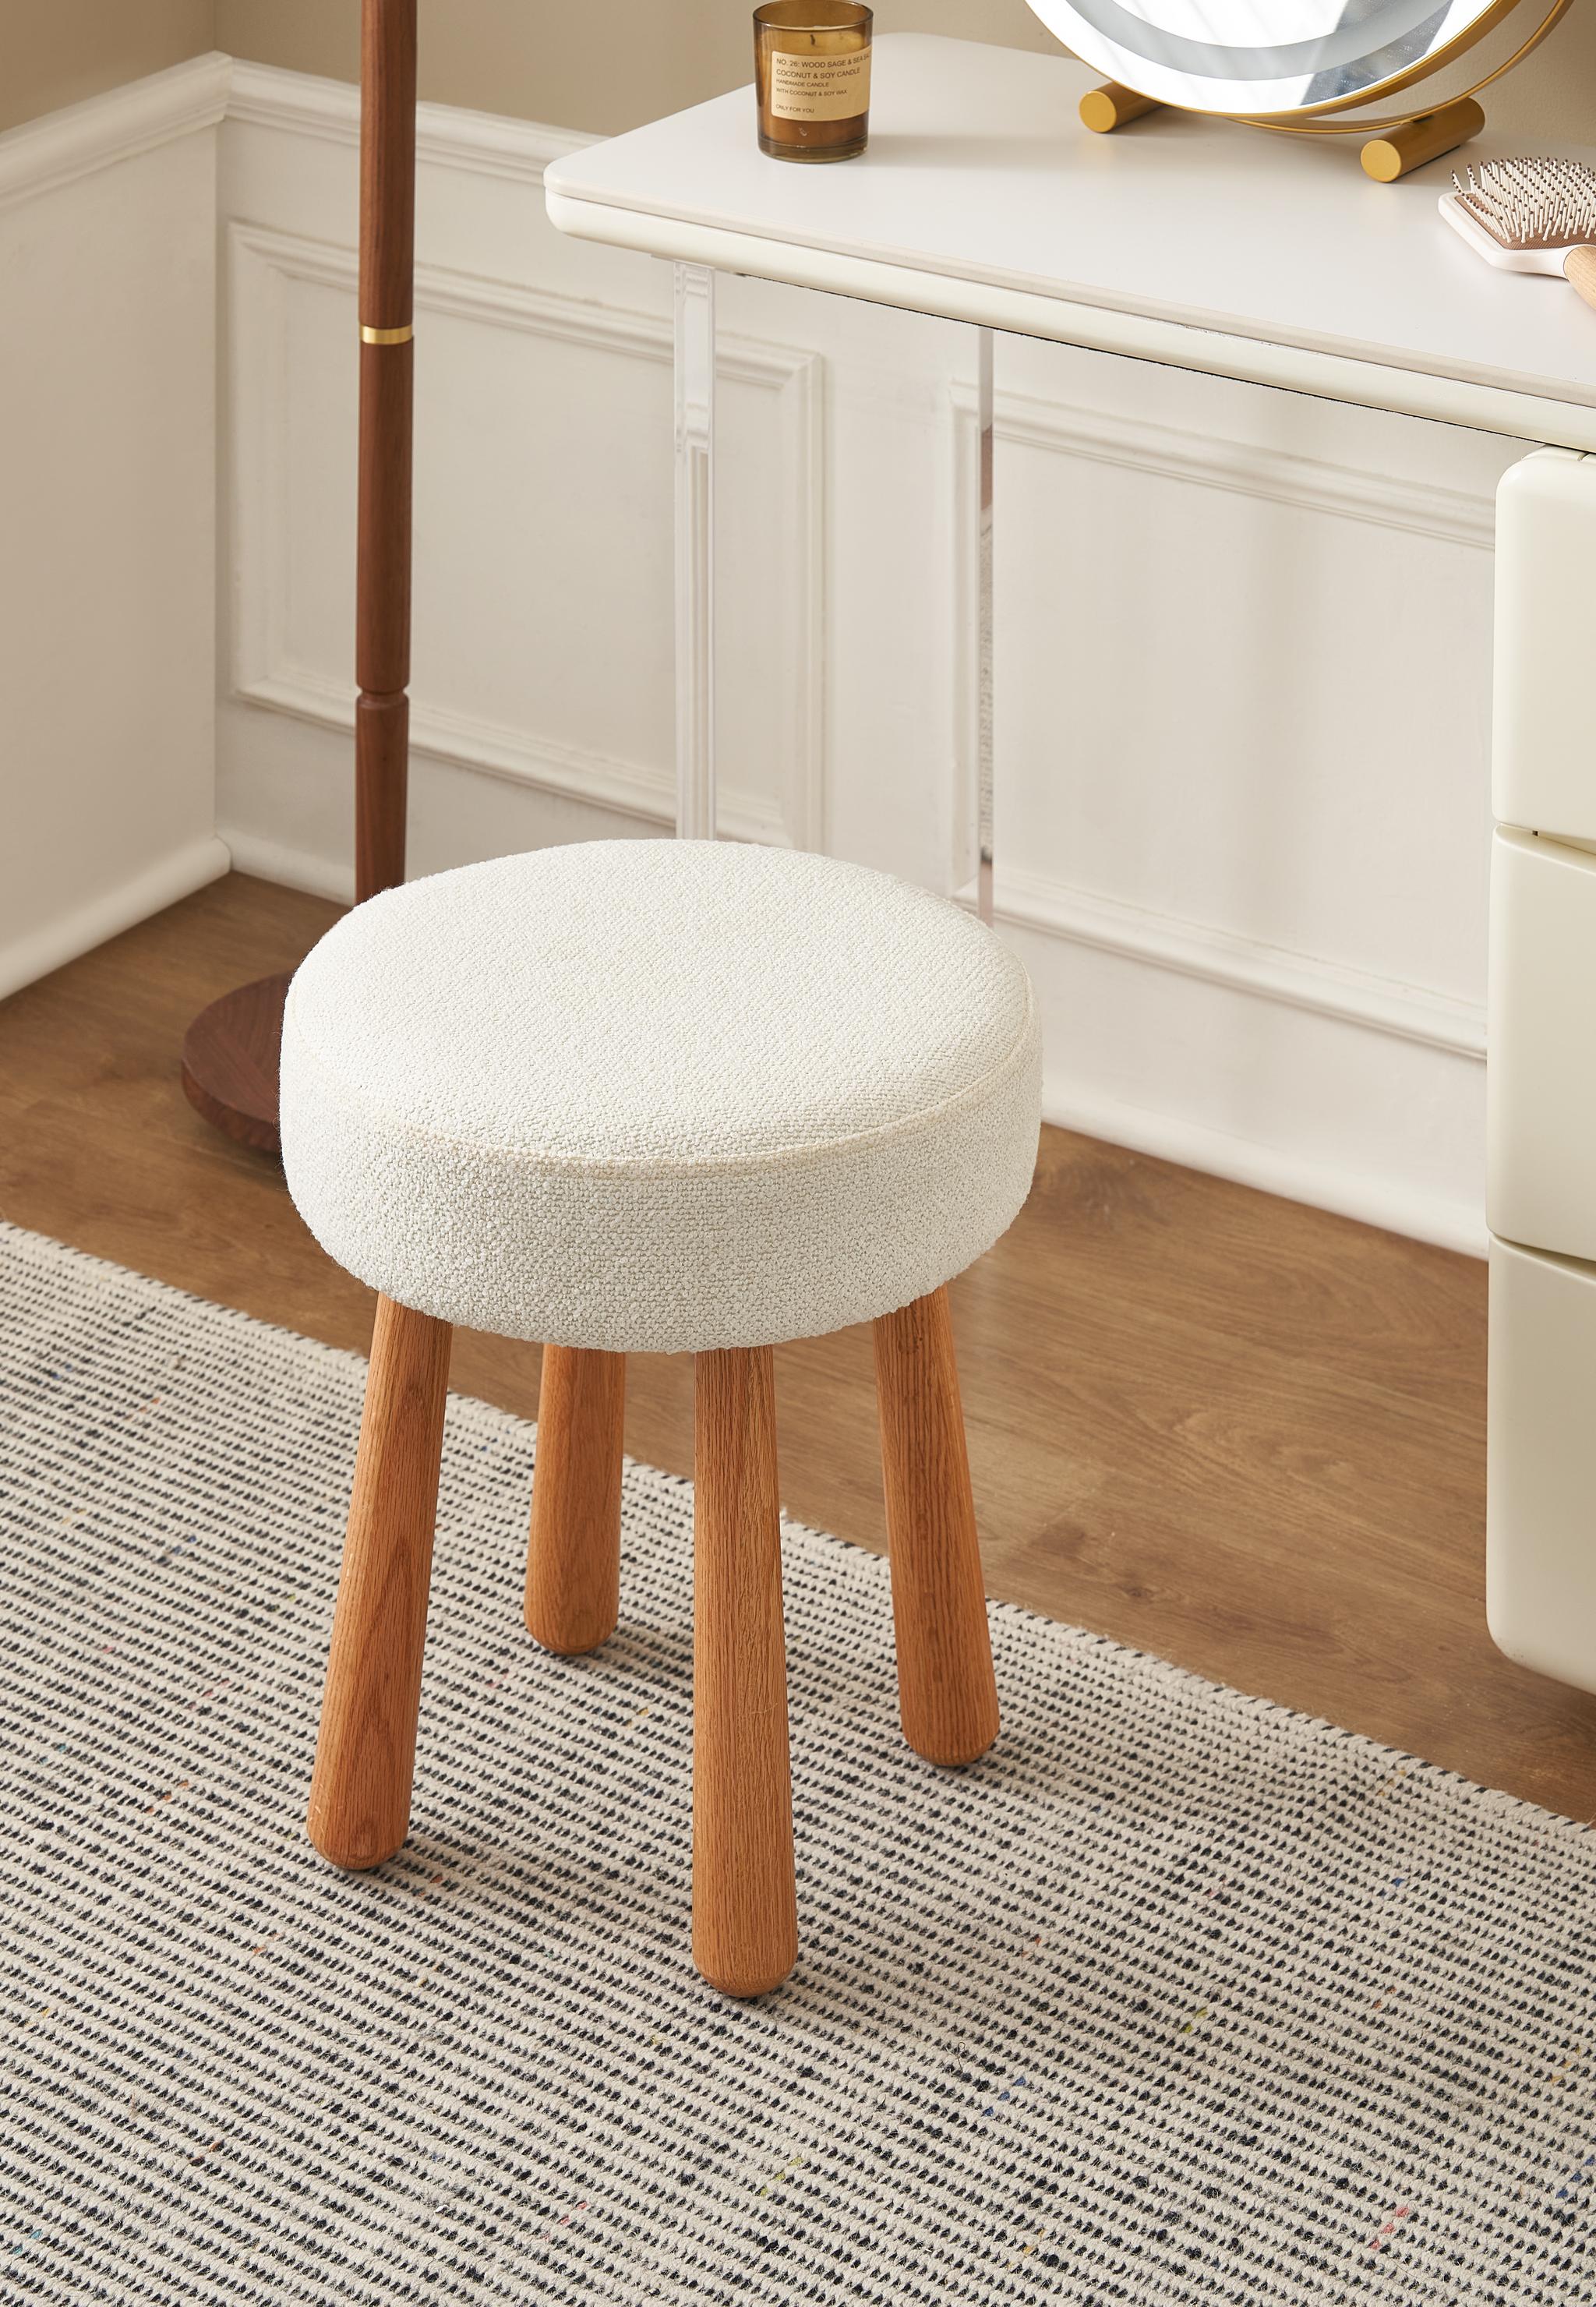 Elegant Carlos Dressing Table with a Seating Stool - WallMantra